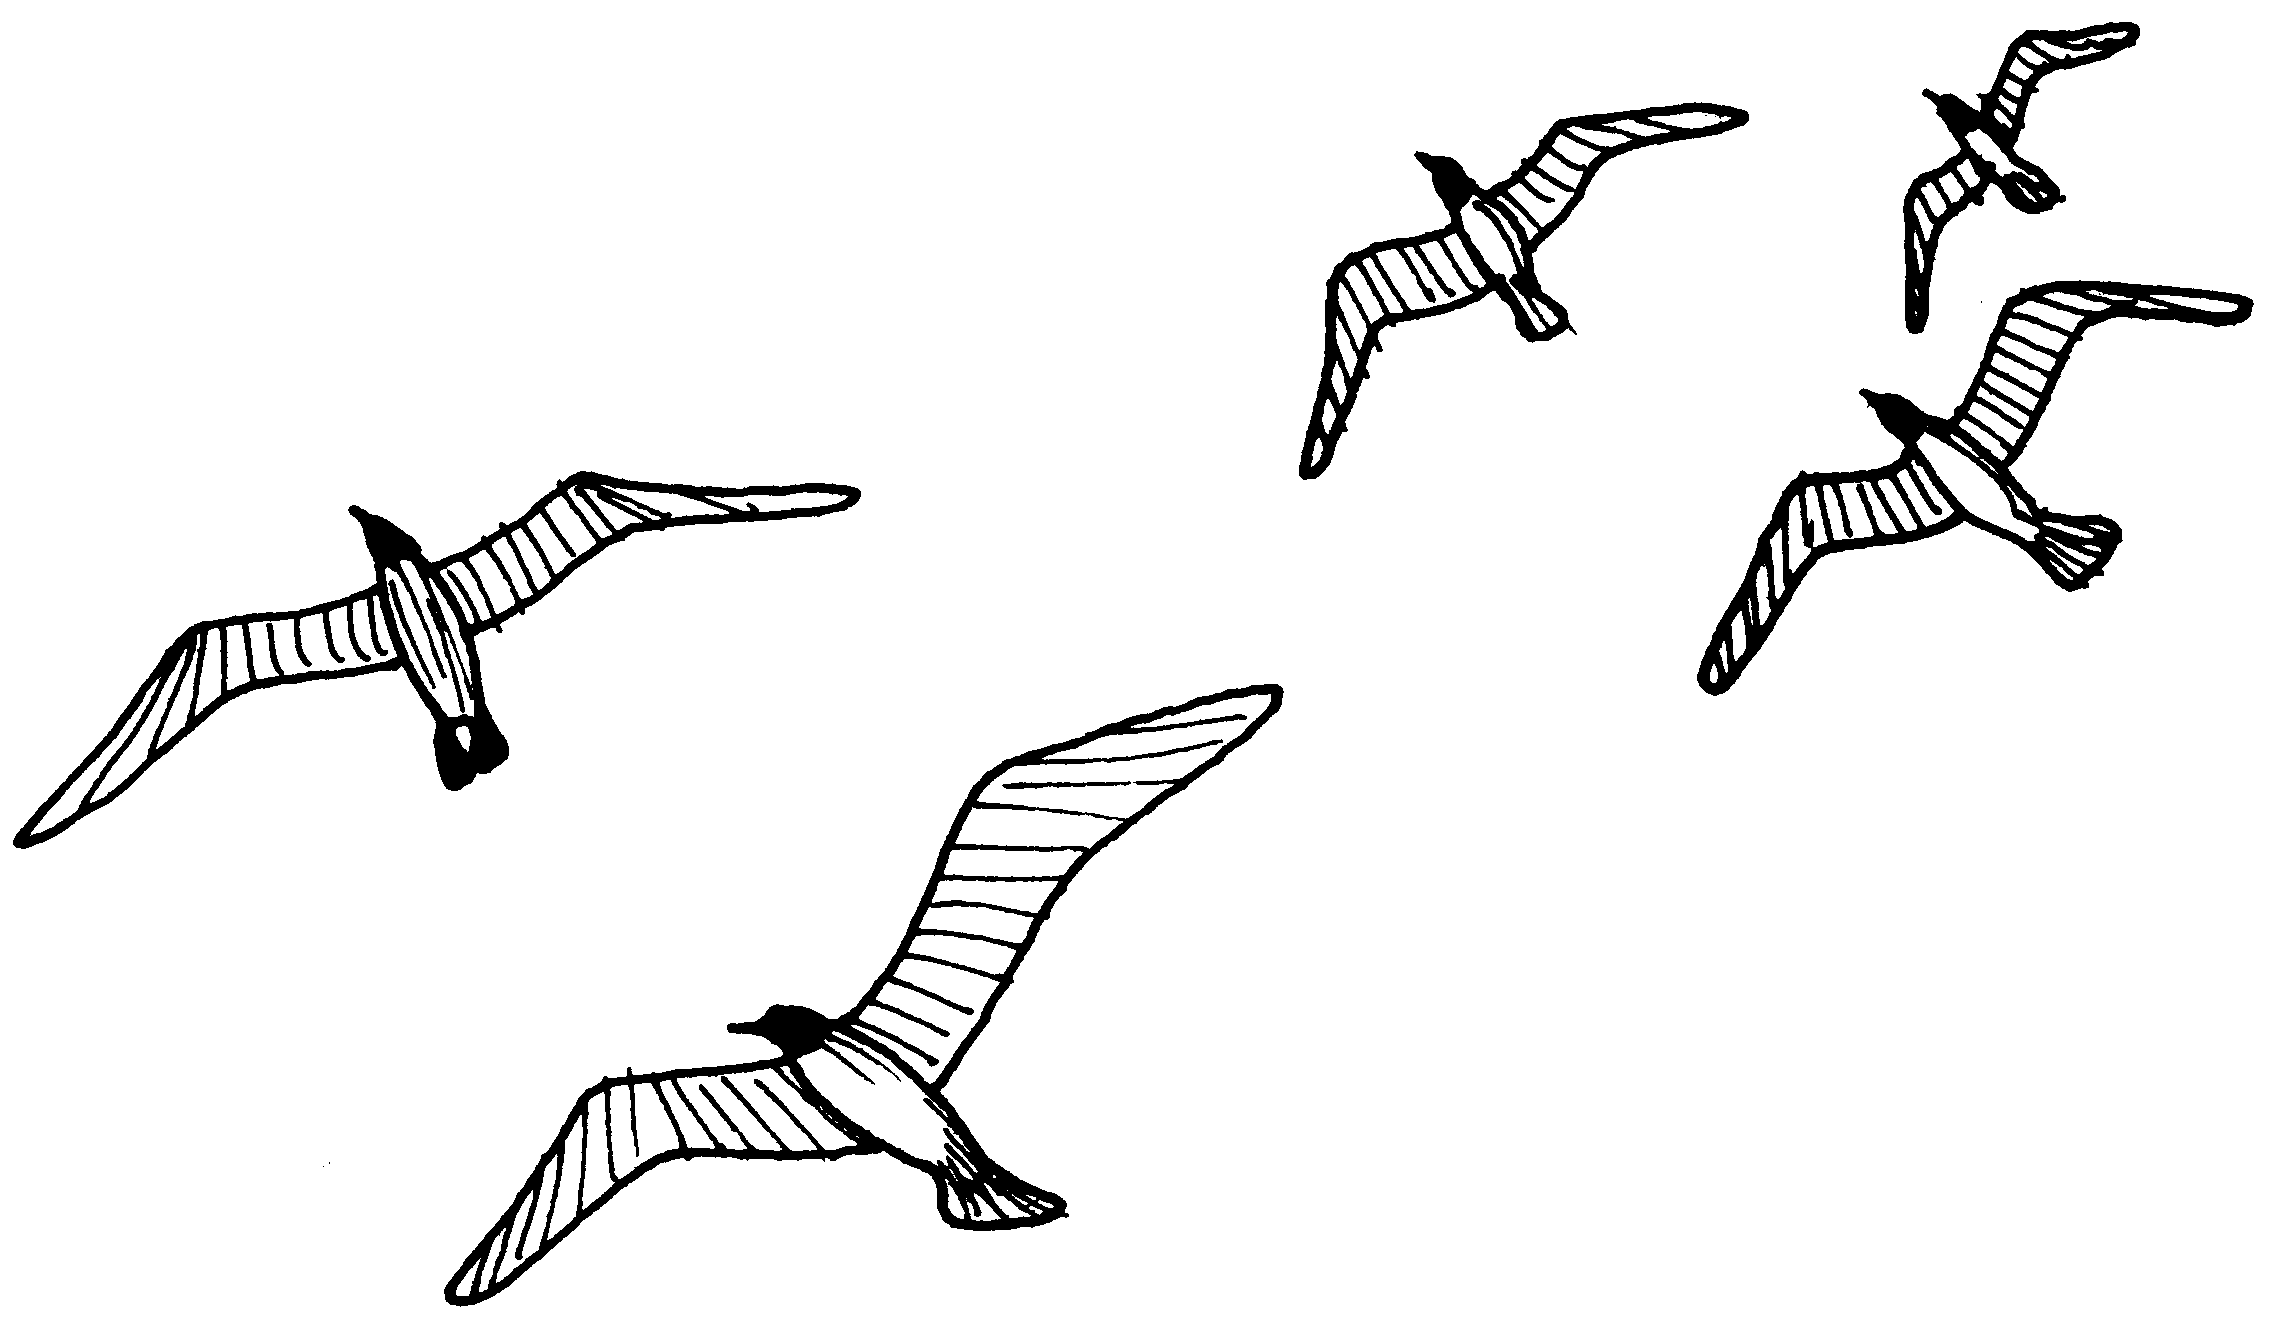 seagull clipart black and white